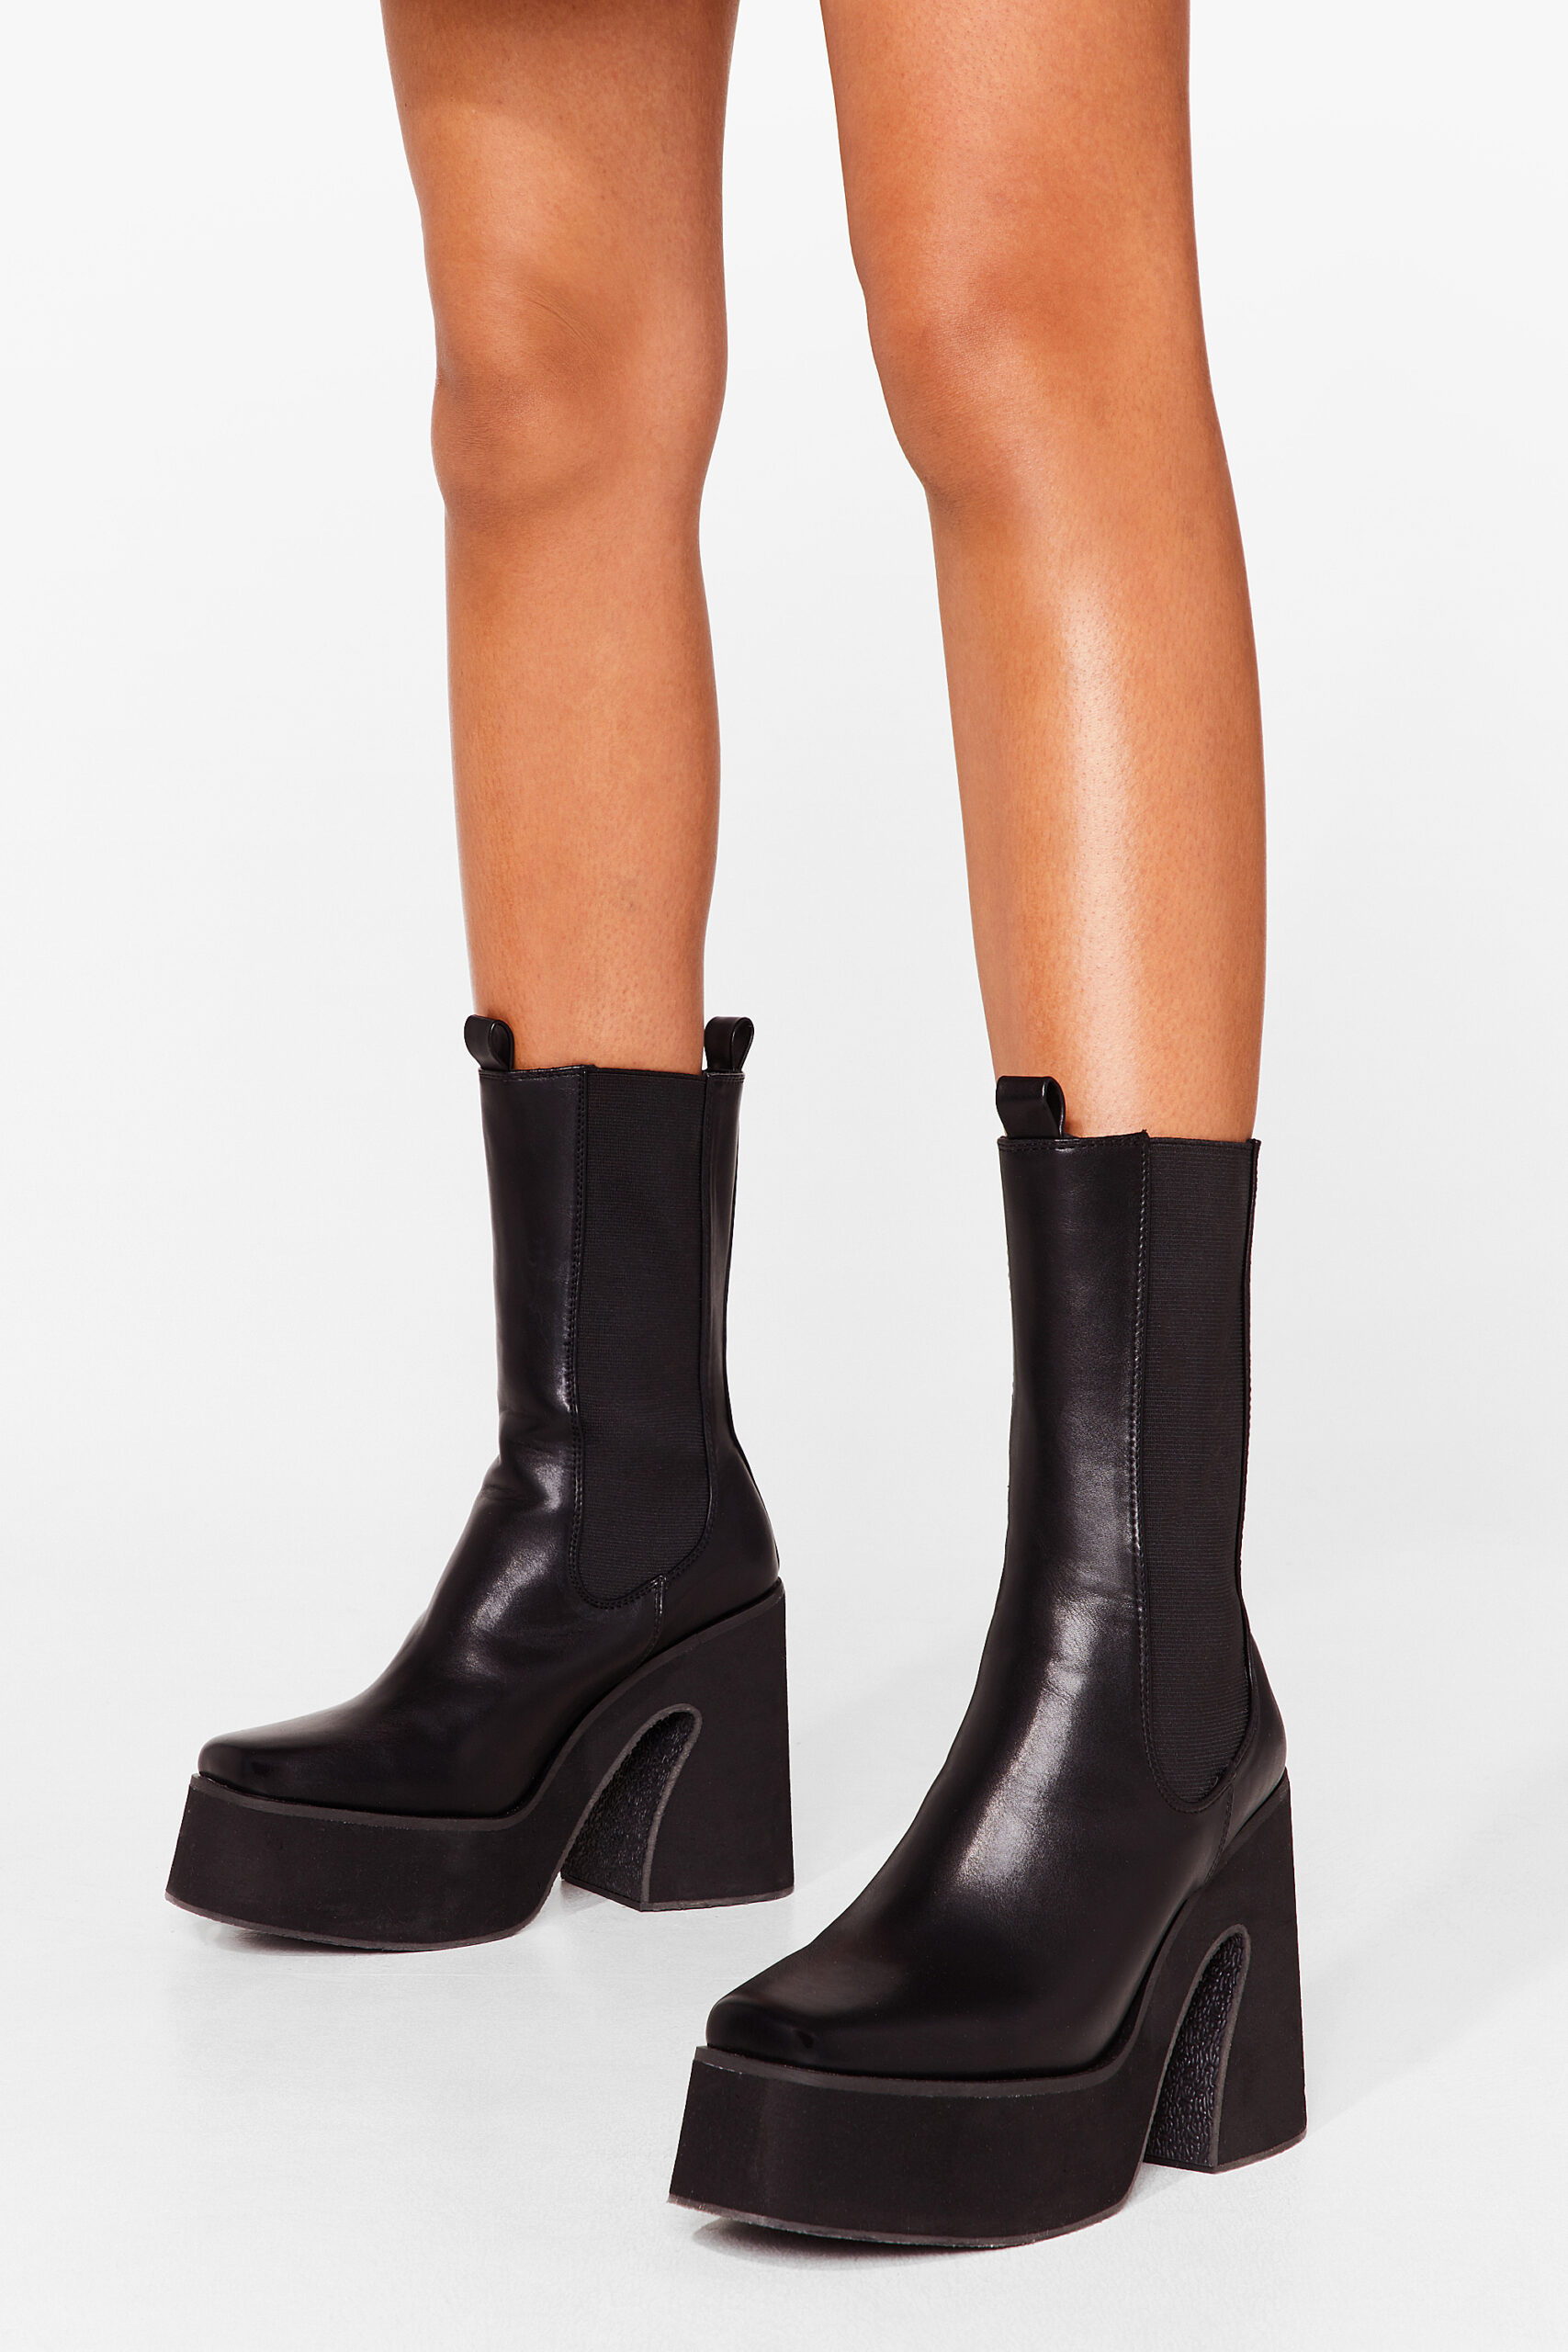 Move On Up Faux Leather Platform Boots